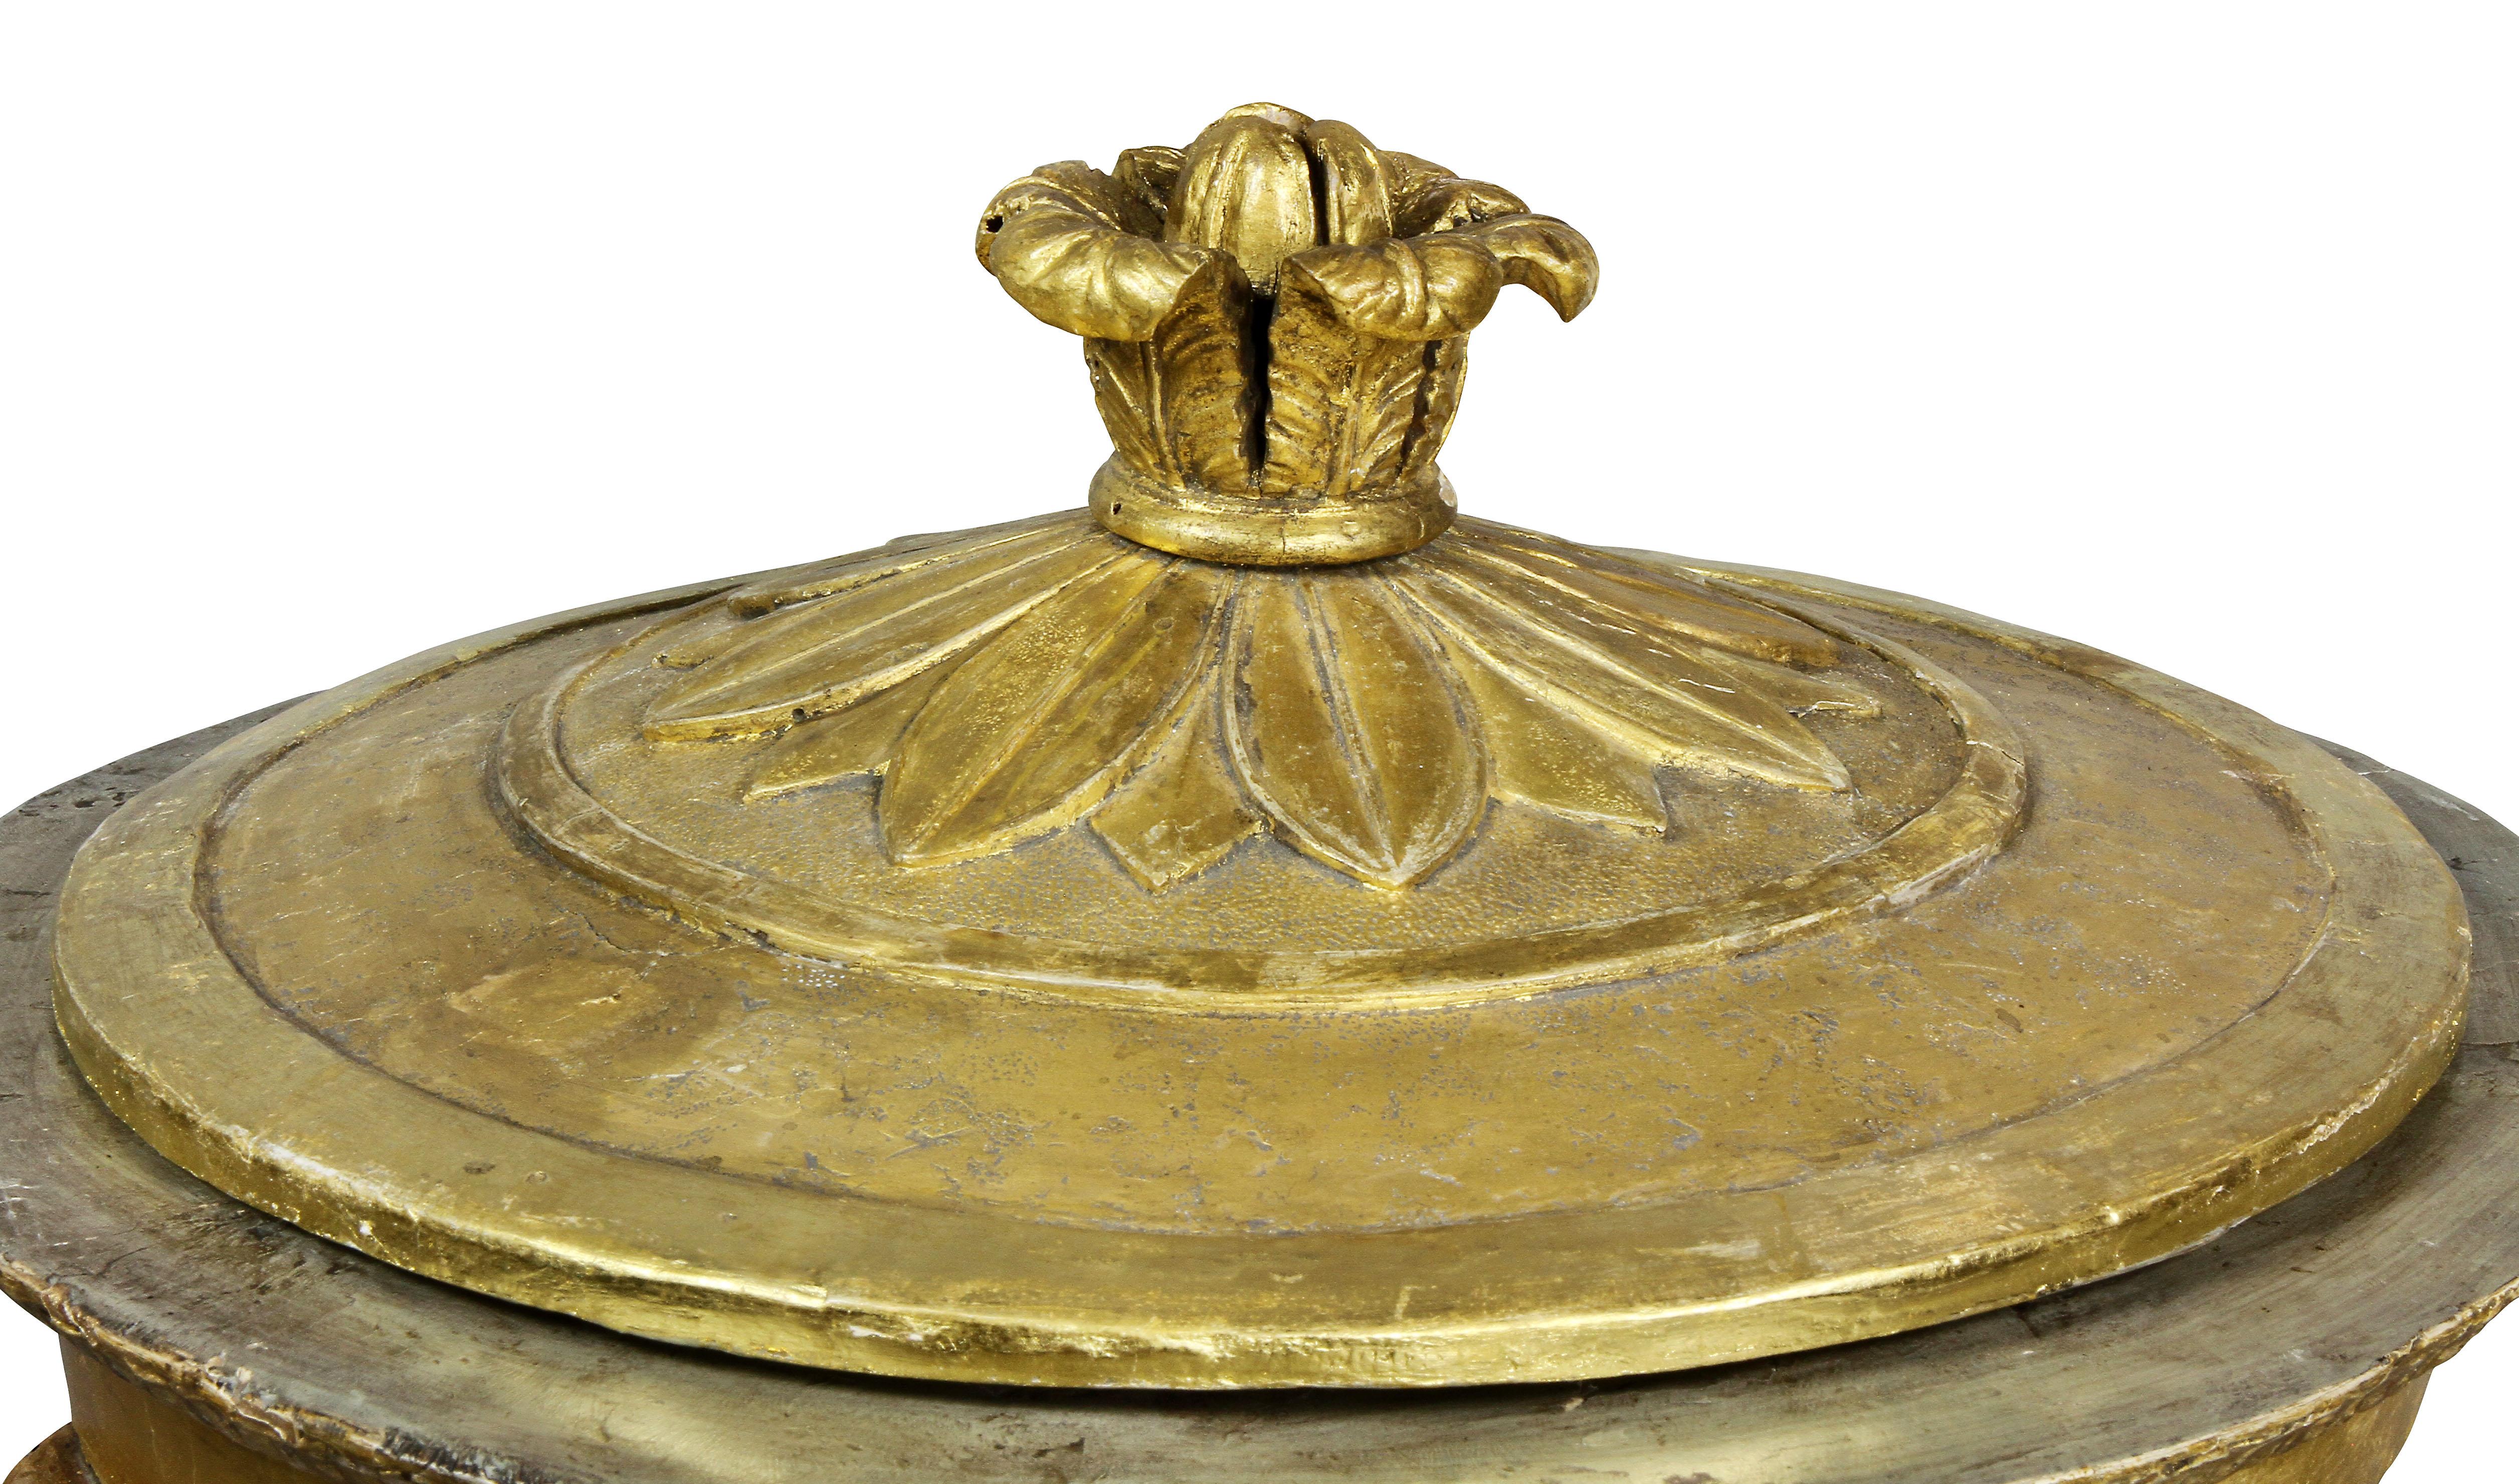 With removable dome cover with leaf form finial, all raised on corinthian columns, conforming base with carved leaf tip decoration.